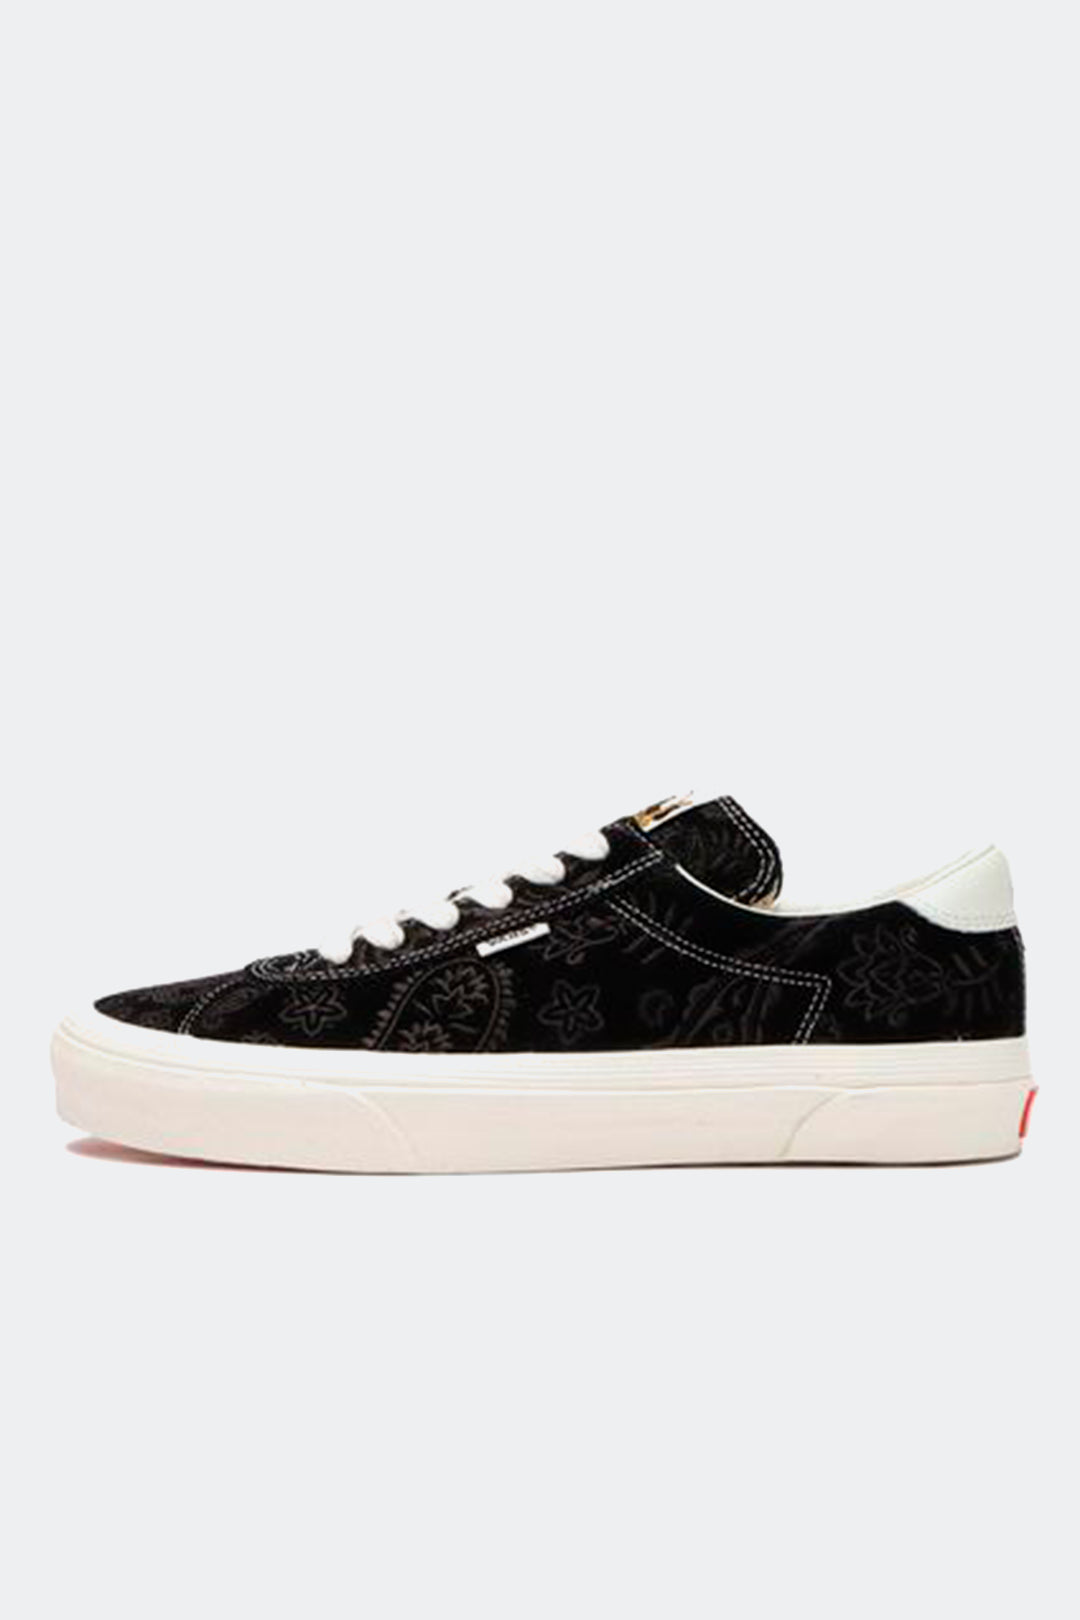 ANDERSON PAAK X SPORT DX "BLACK PAISLEY" - HYPE